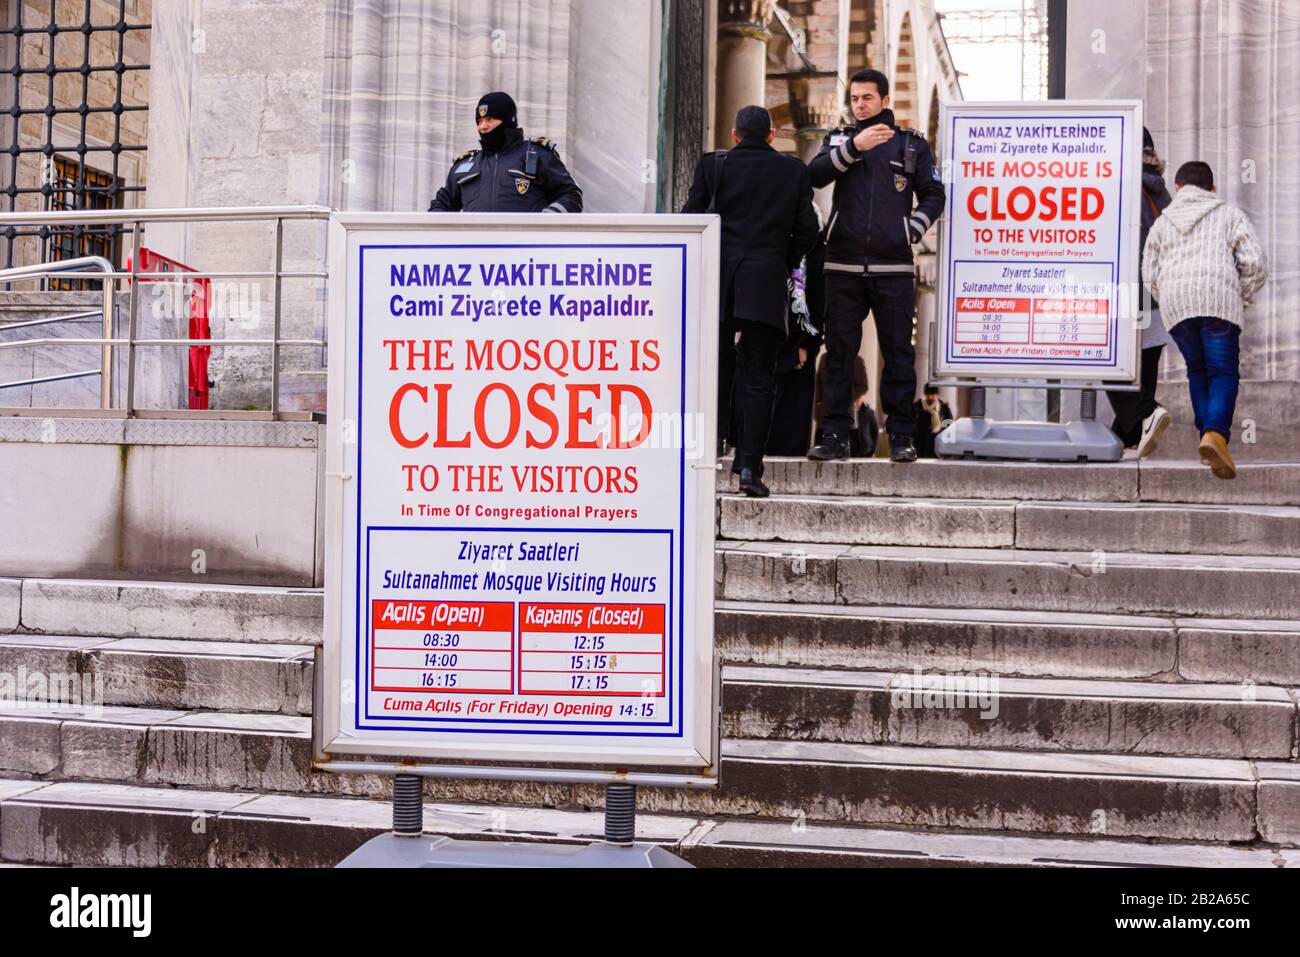 Police stand behind a sign outside the Blue Mosque saying that the mosque is closed to visitors during prayer. Istanbul, Turkey Stock Photo